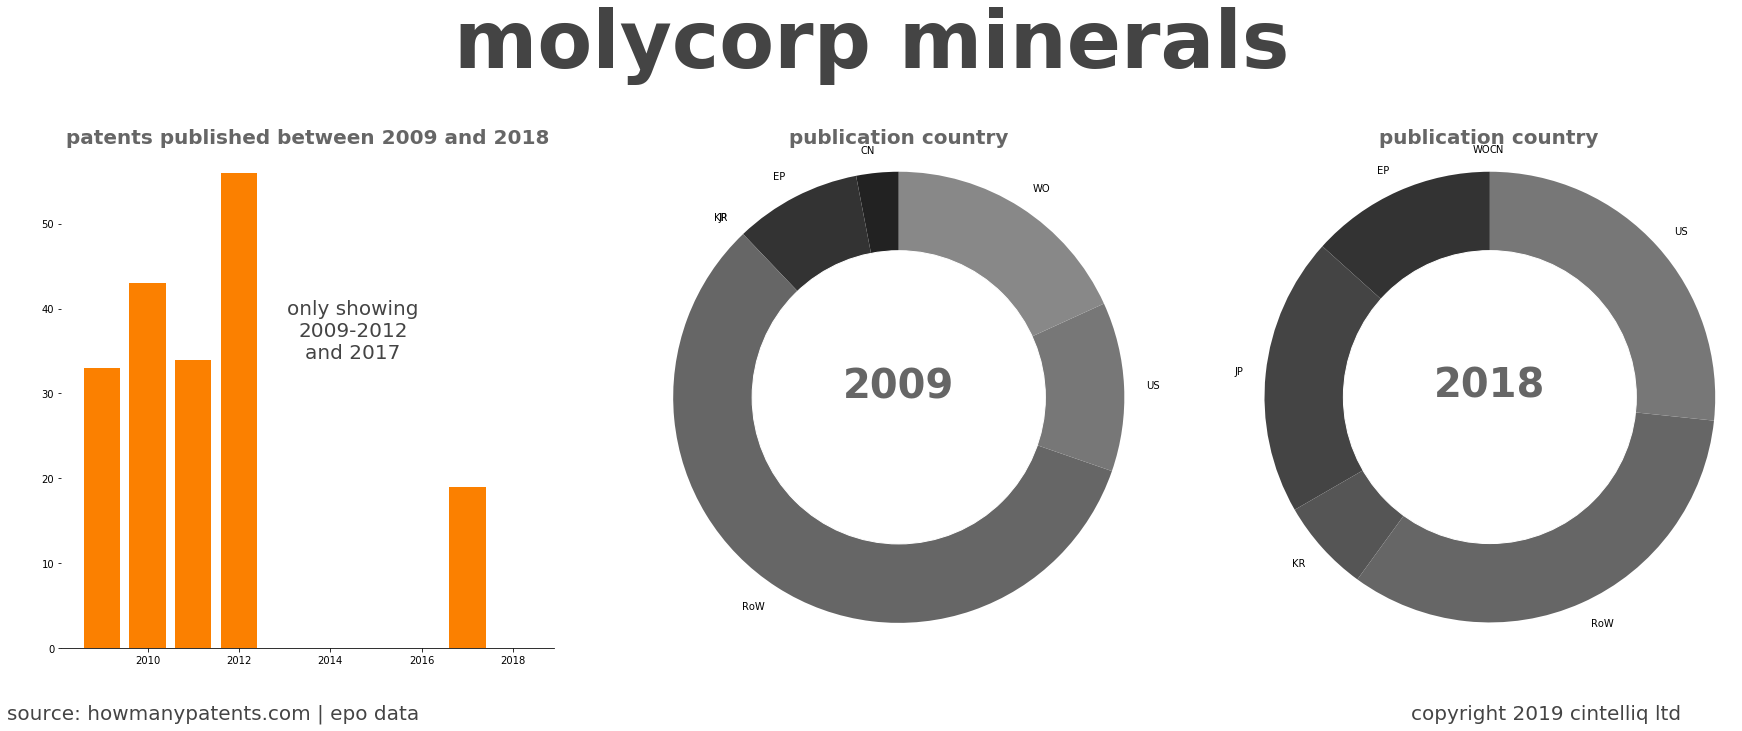 summary of patents for Molycorp Minerals